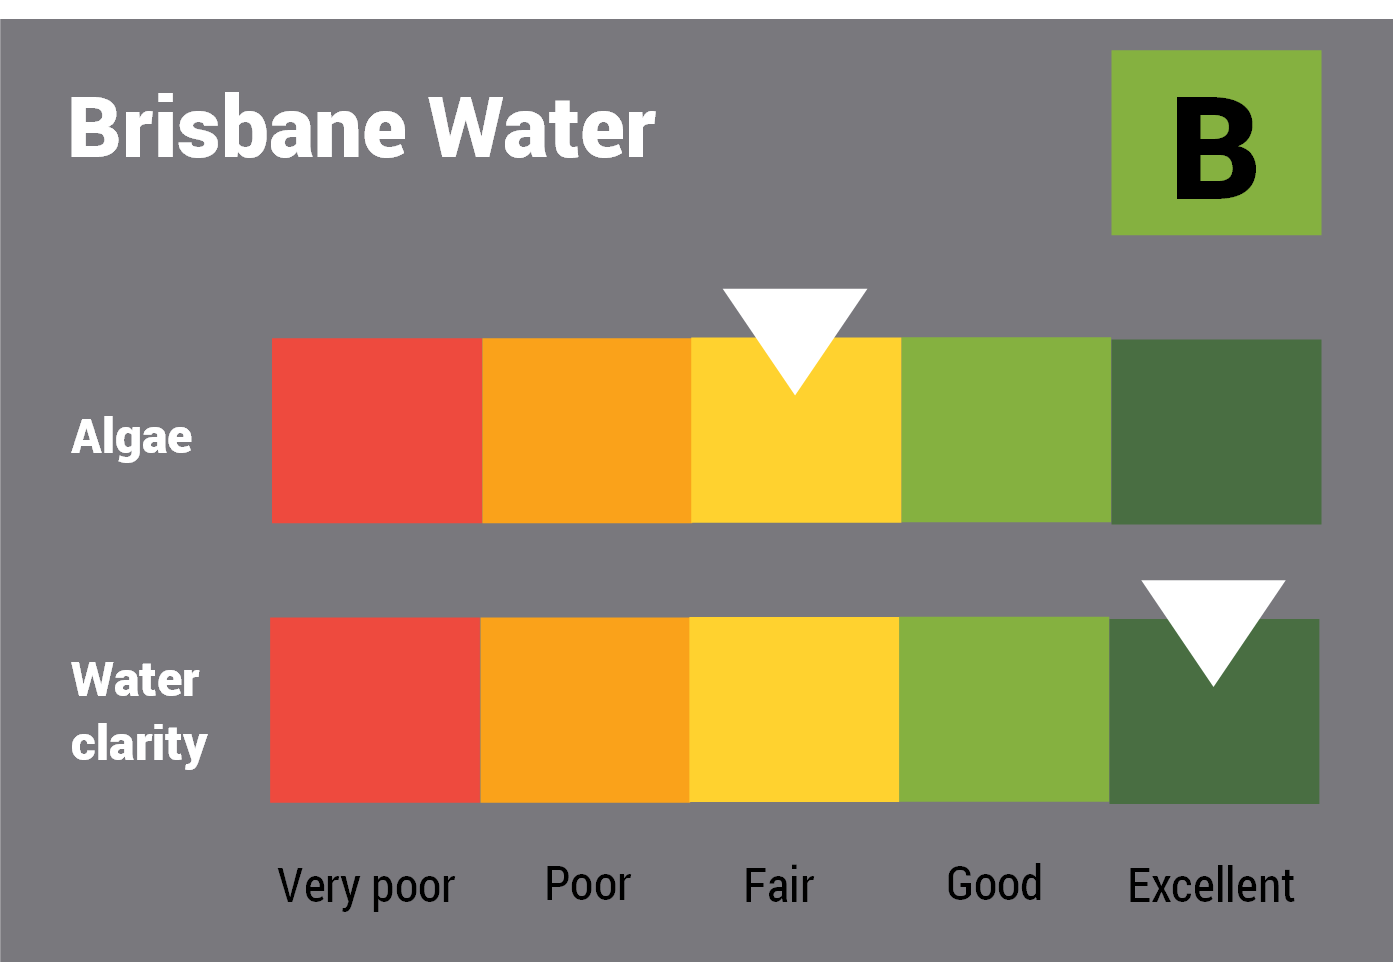 Brisbane Water water quality report card showing colour-coded ratings (red, orange, yellow, light green and dark green, which represent very poor, poor, fair, good and excellent, respectively) for algae and water clarity. Algae is rated 'good' and water clarity is rated 'excellent', giving an overall rating of 'excellent' or 'A'.